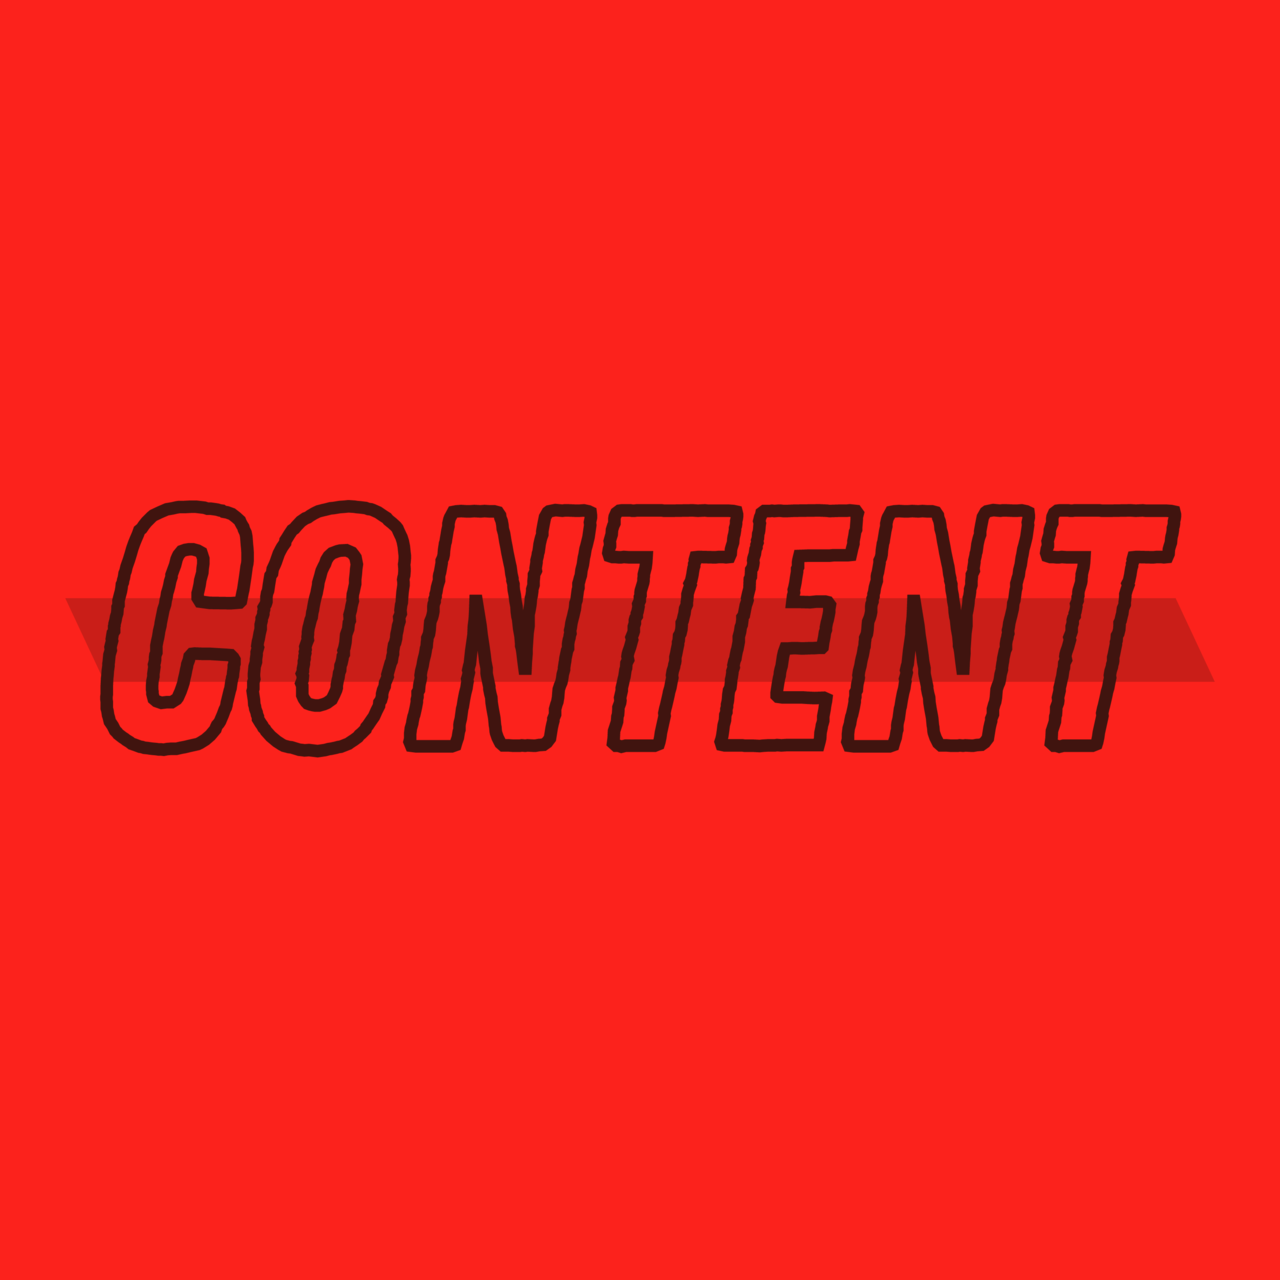 Don't Say Content